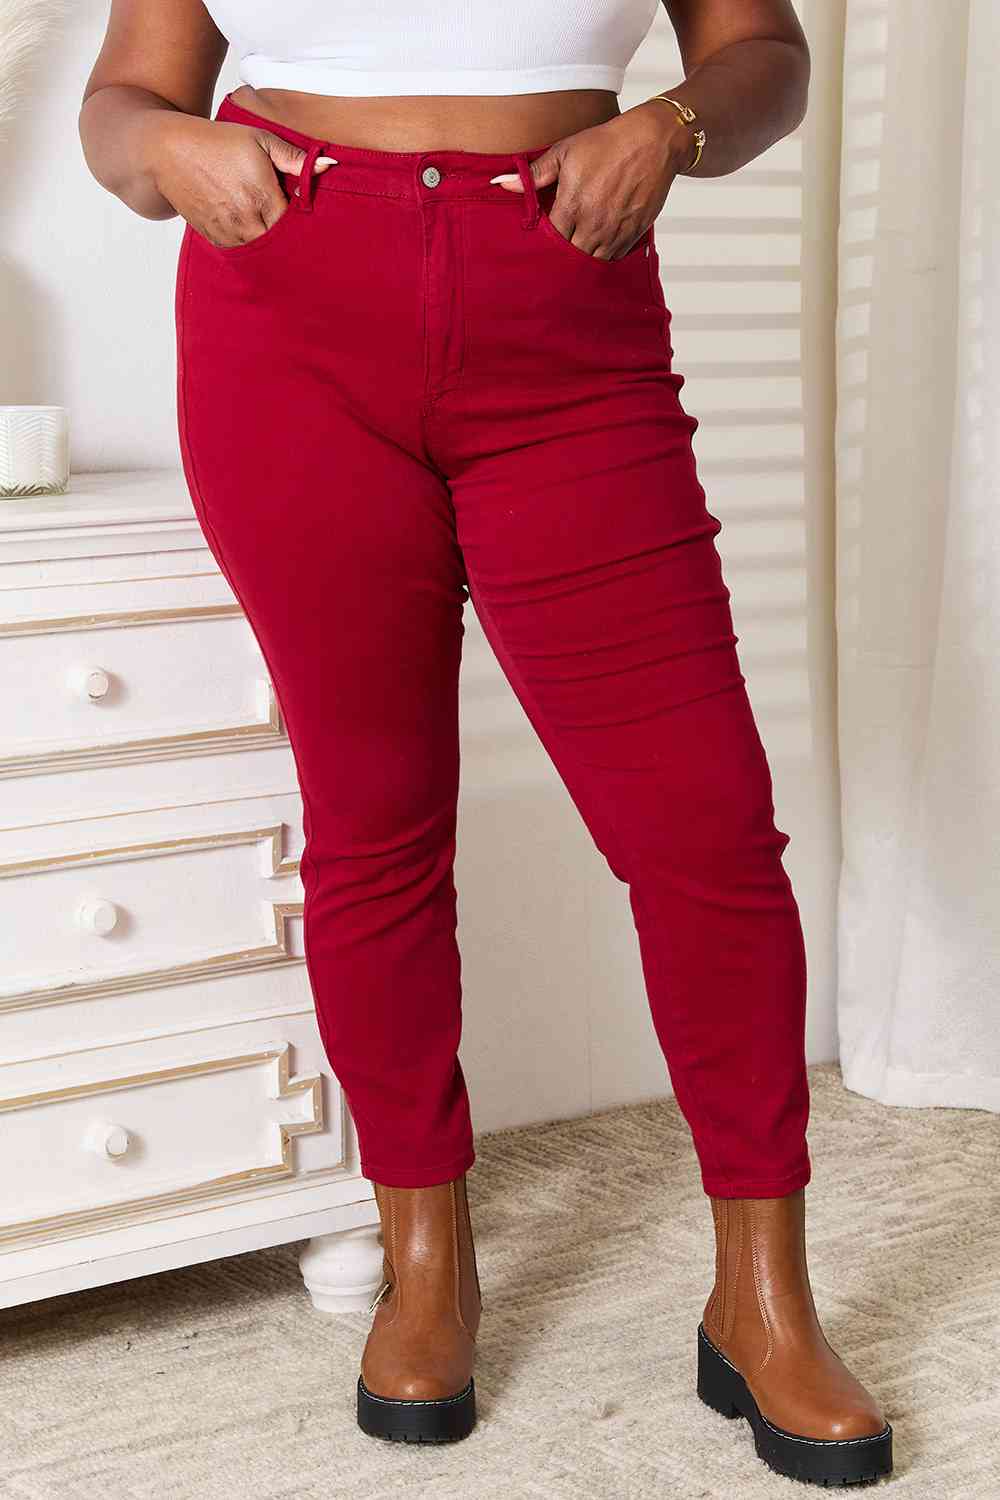 Judy Blue Red Skinny Jeans